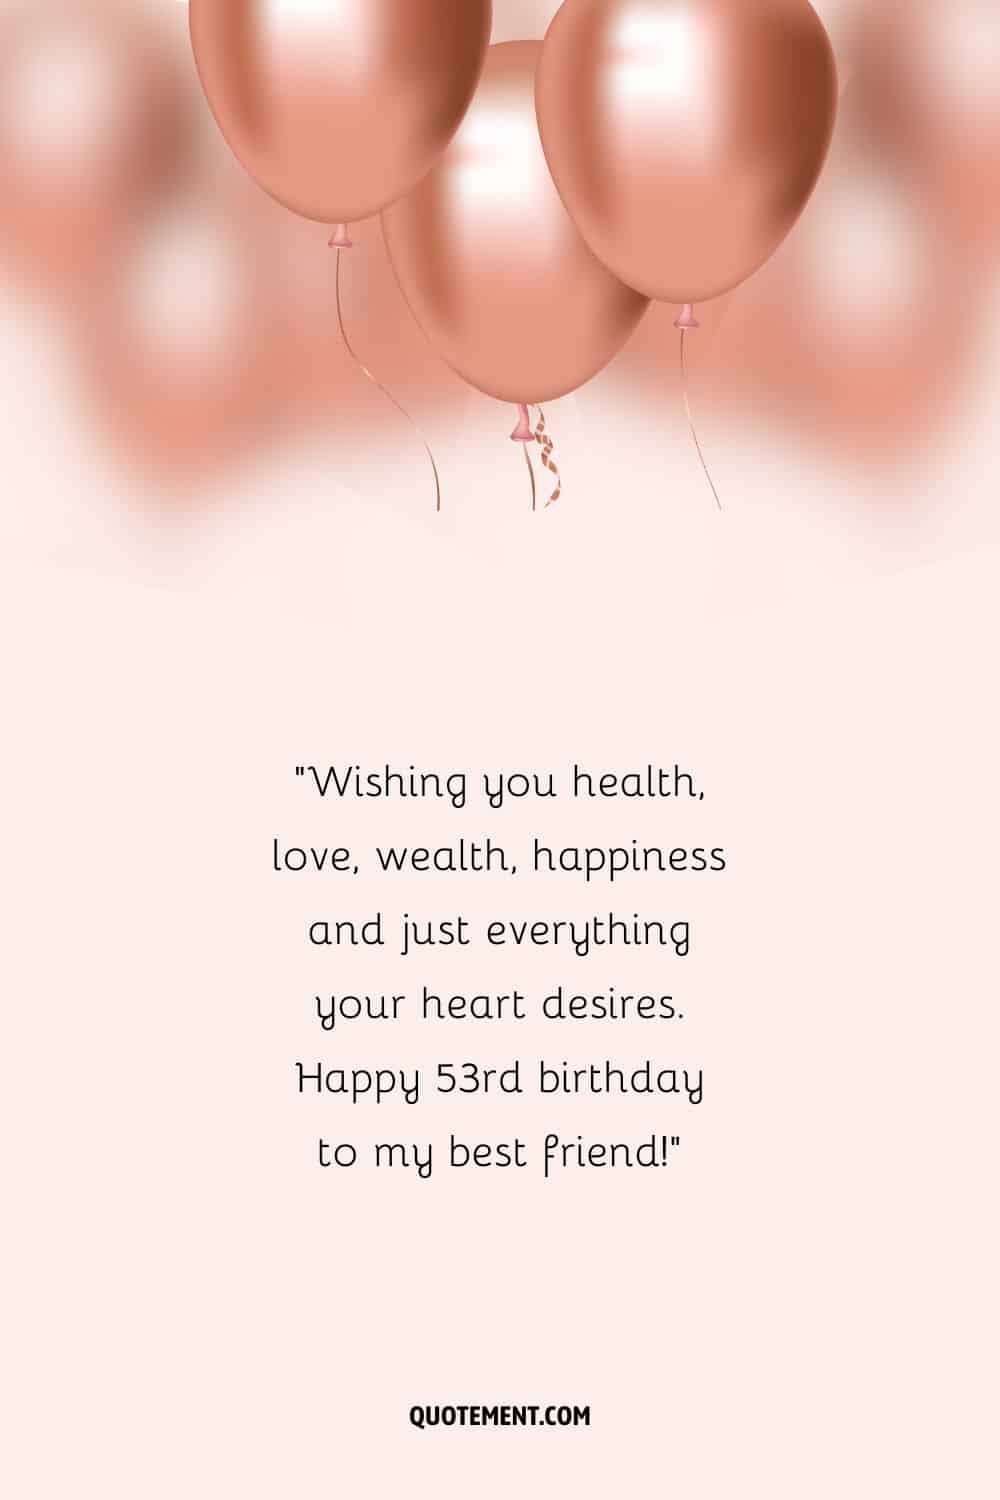 Touching wish for a friend's 53rd birthday and rose gold balloons as well